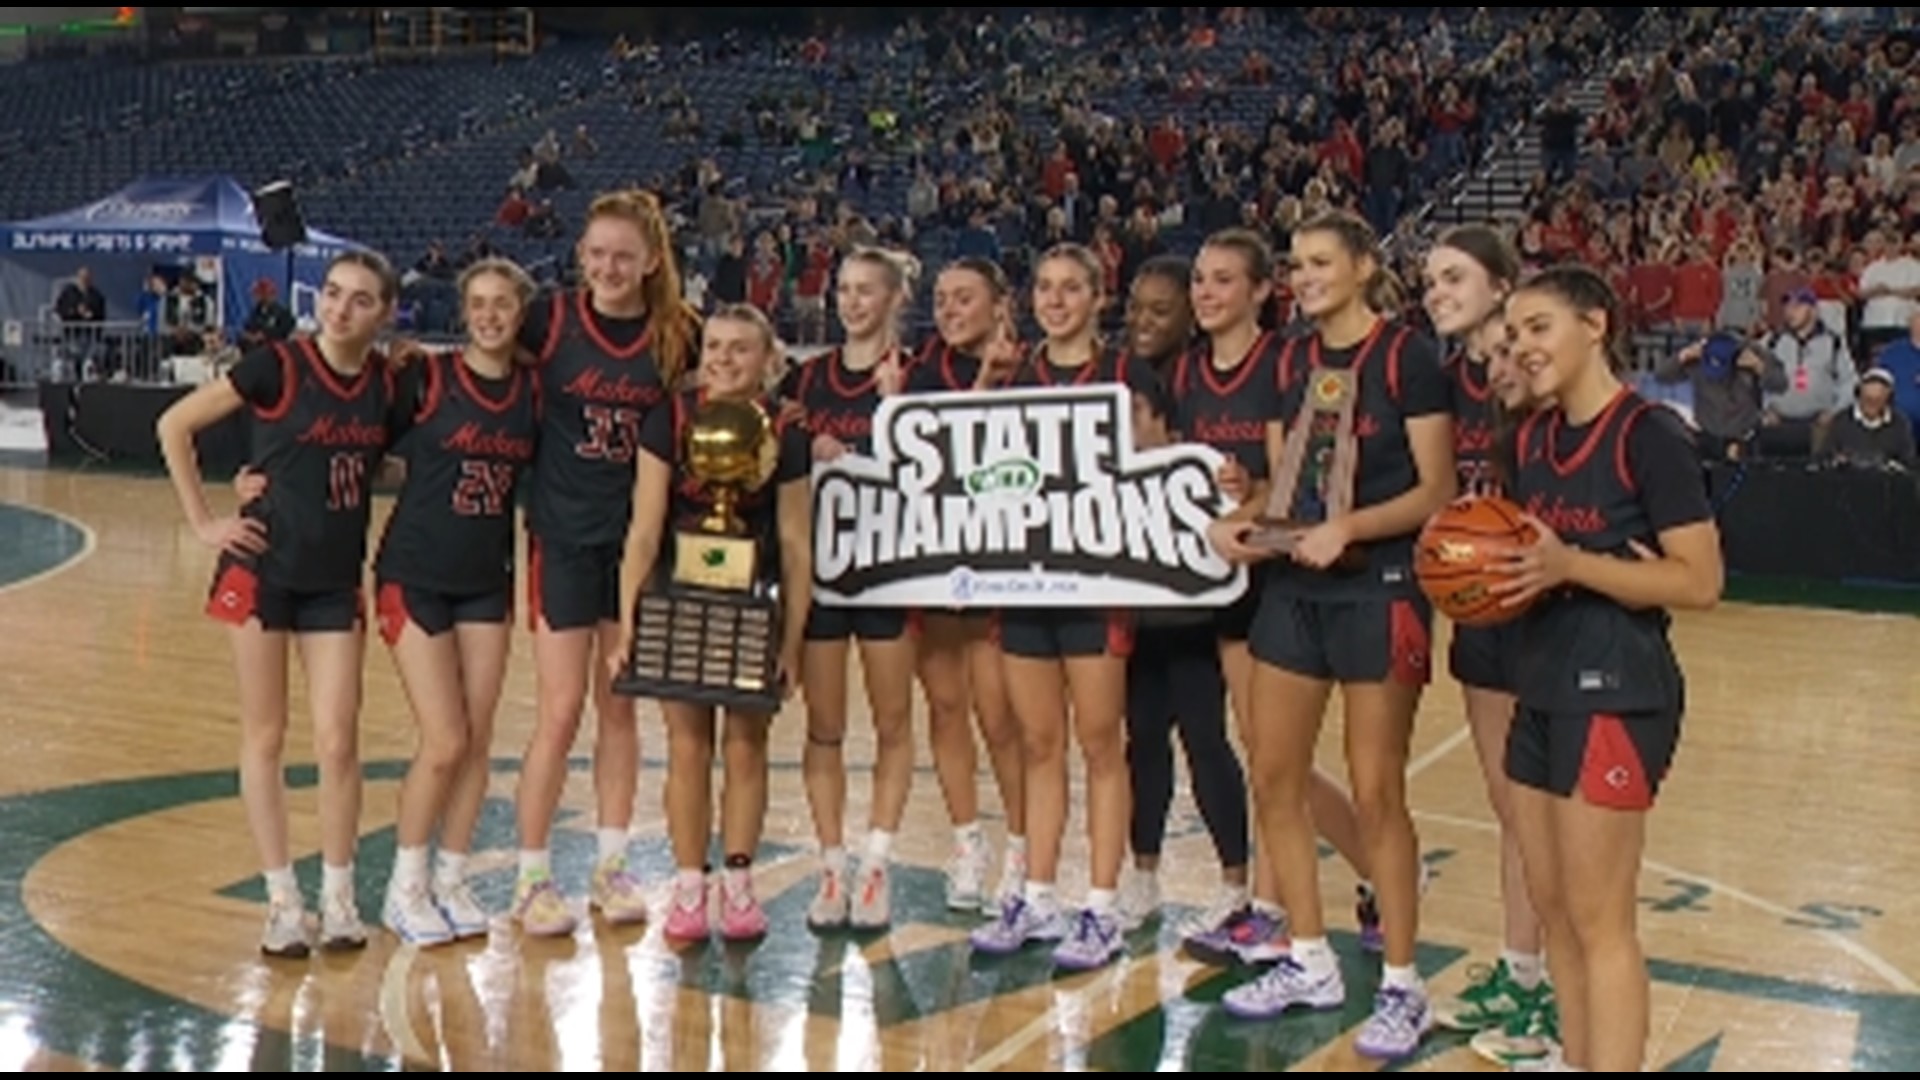 Highlights of the Camas girls 57-41 win over Gonzaga Prep in the 4A State Championship